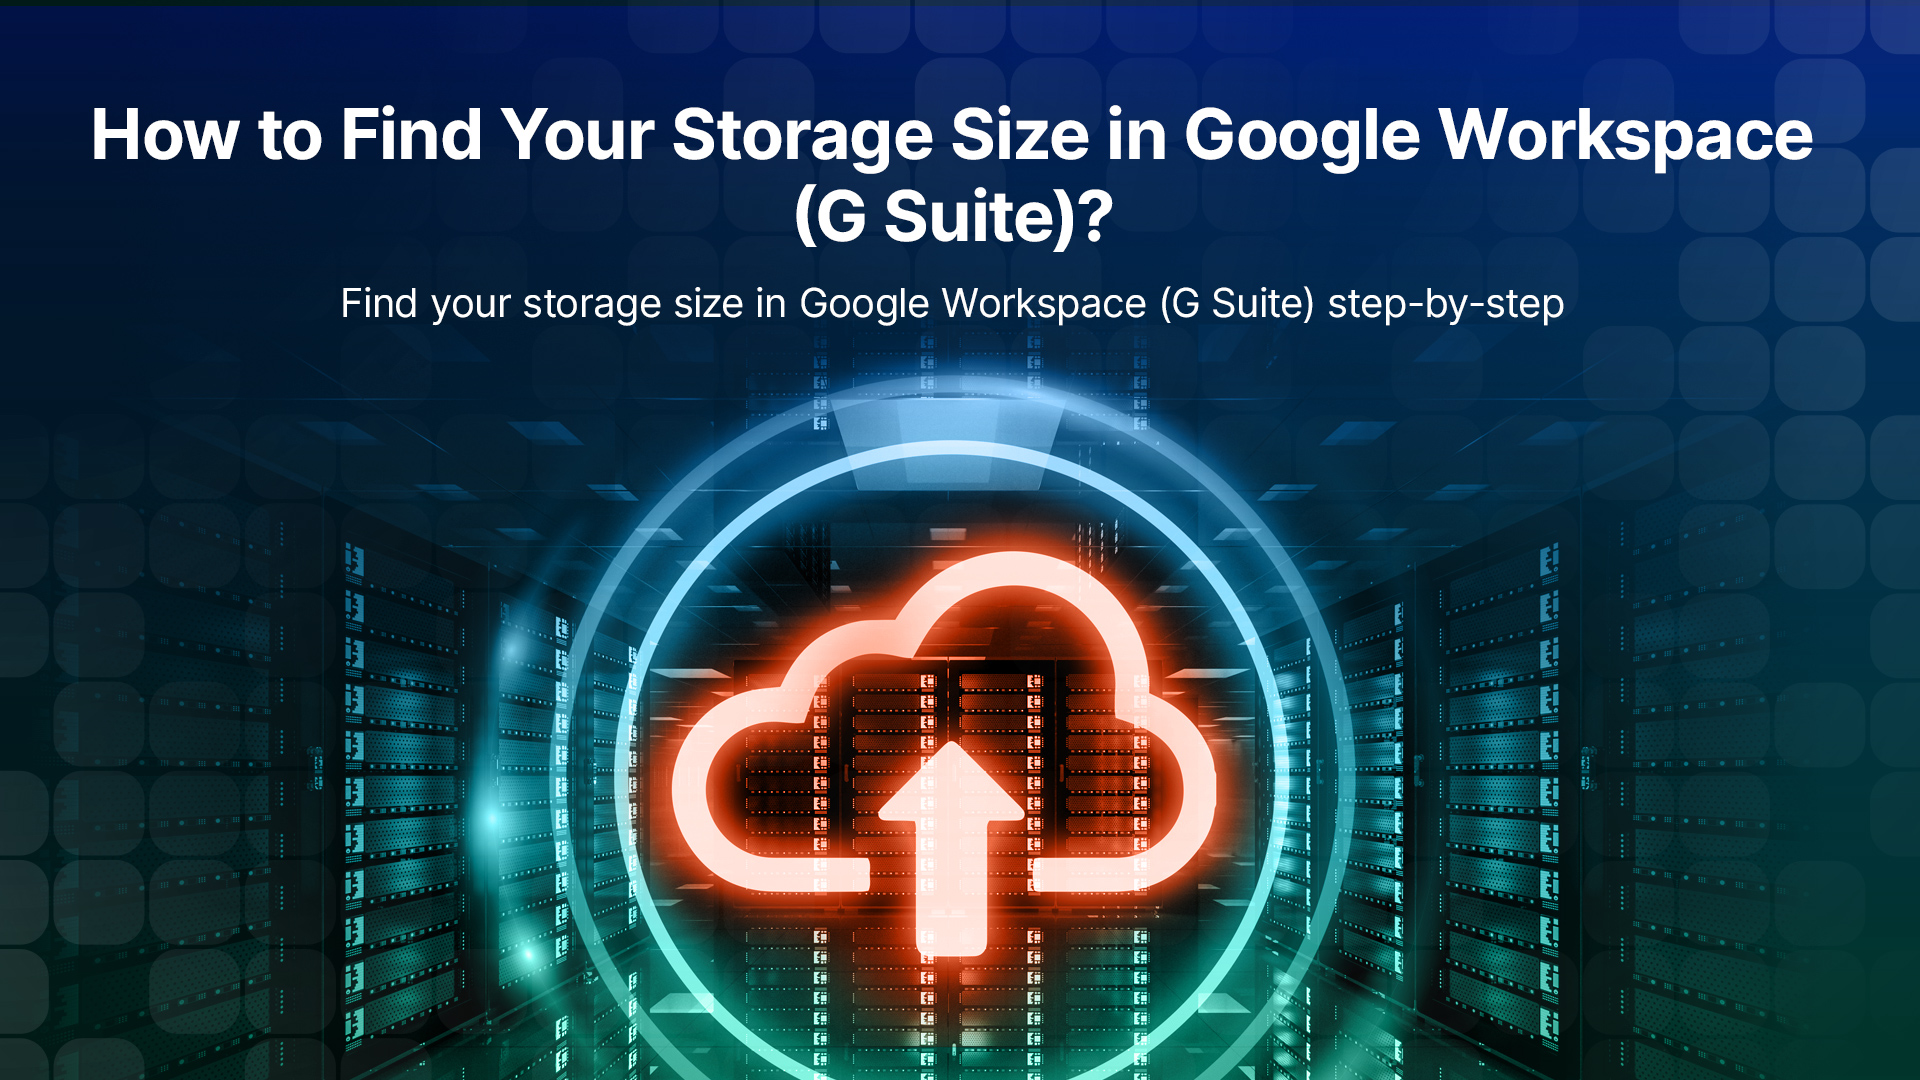 How to Find Your Storage Size in Google Workspace G Suite How to Find Your Storage Size in Google Workspace G Suite